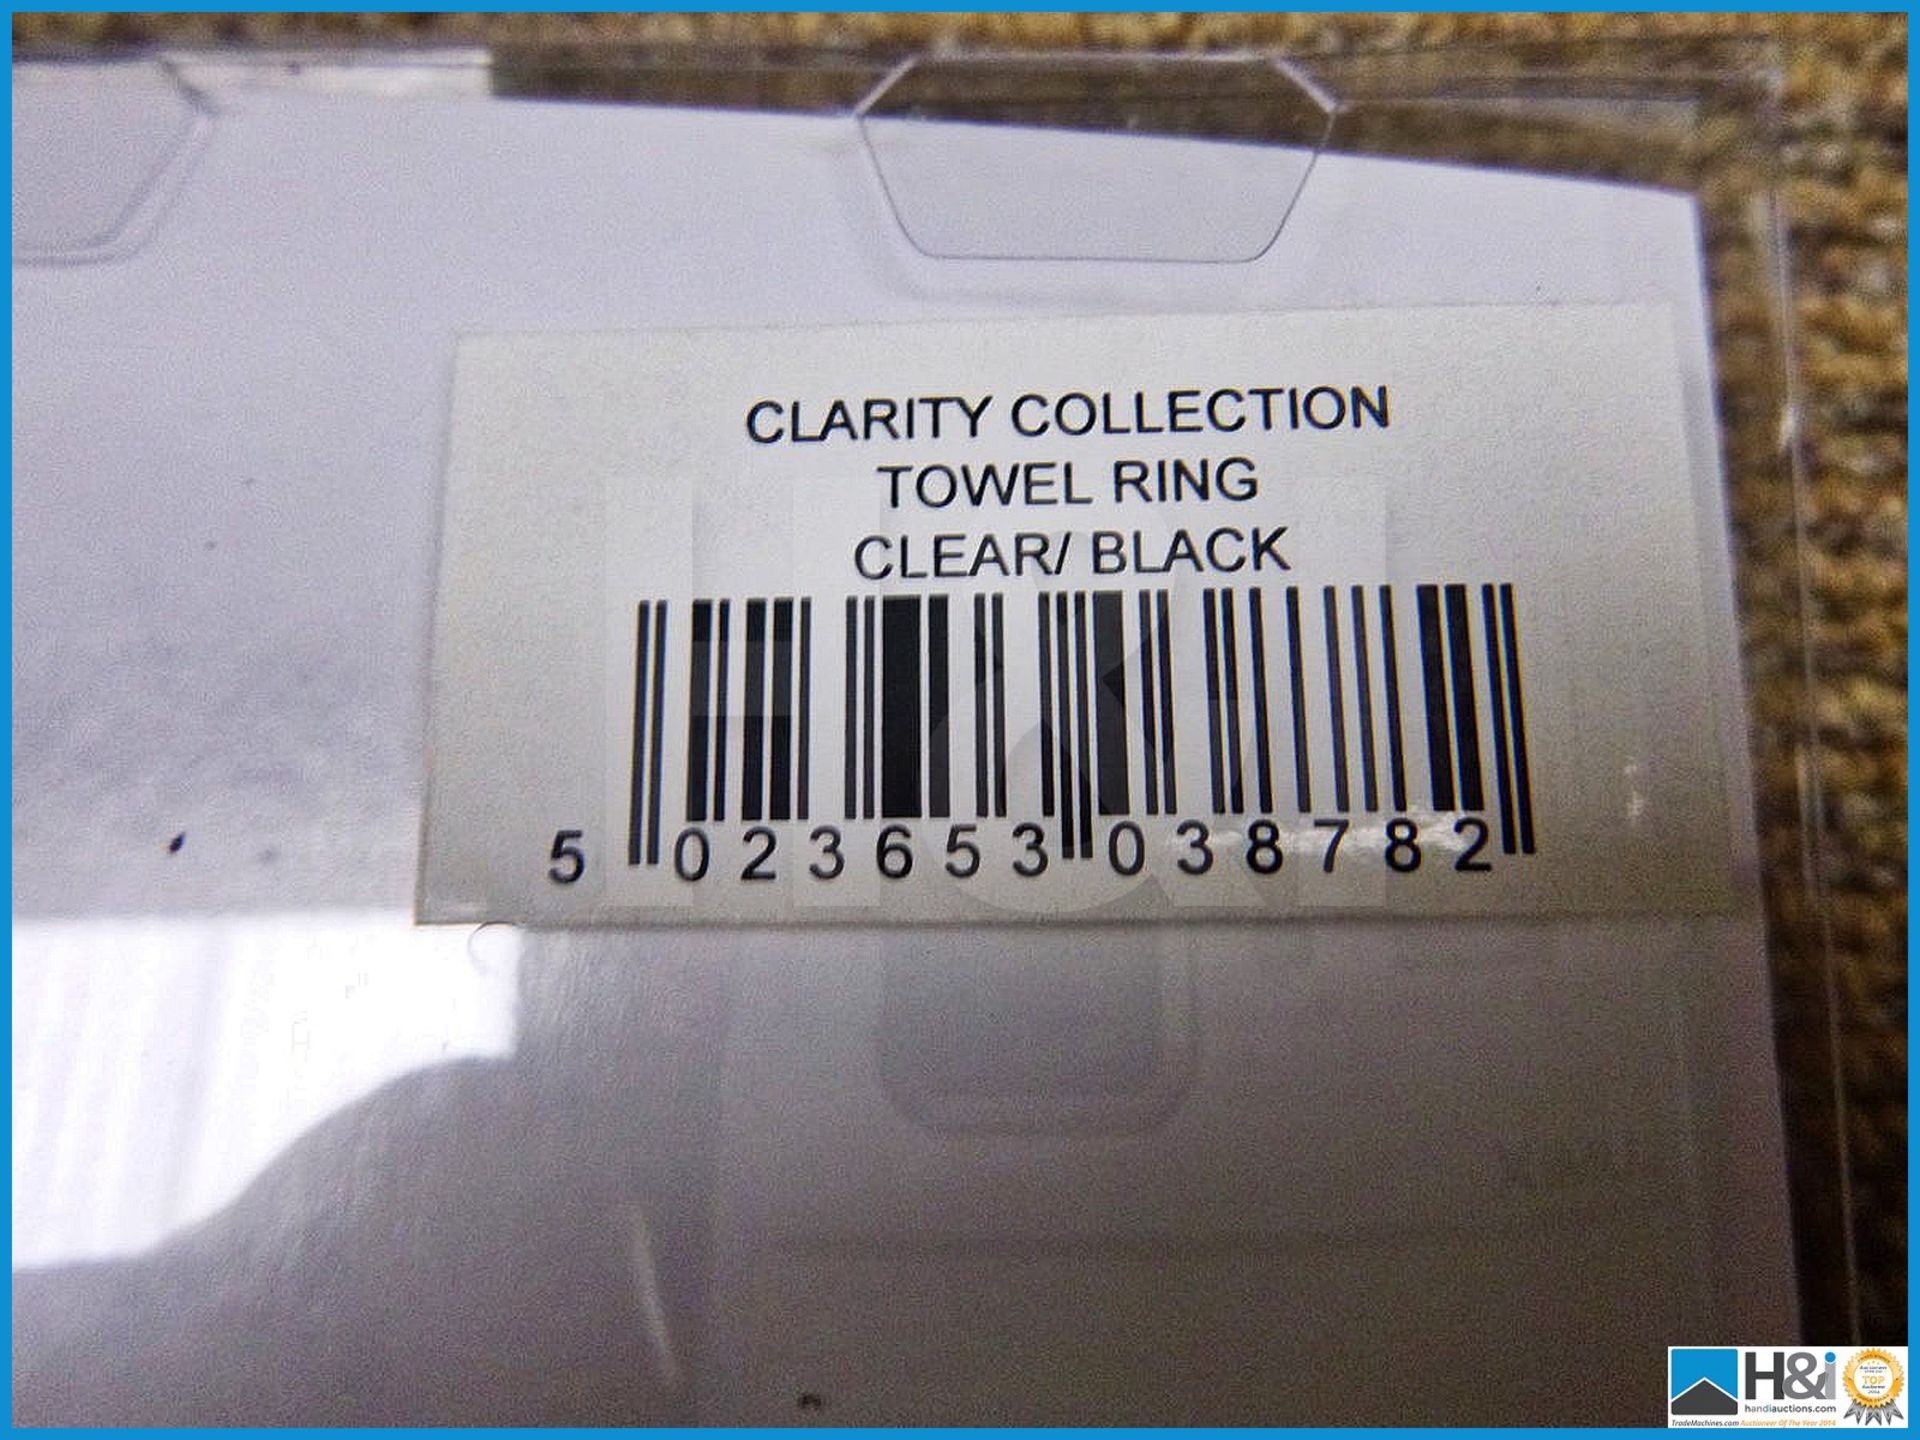 Showerdrape towel ring clear/black from the clarity collection. - Image 3 of 3